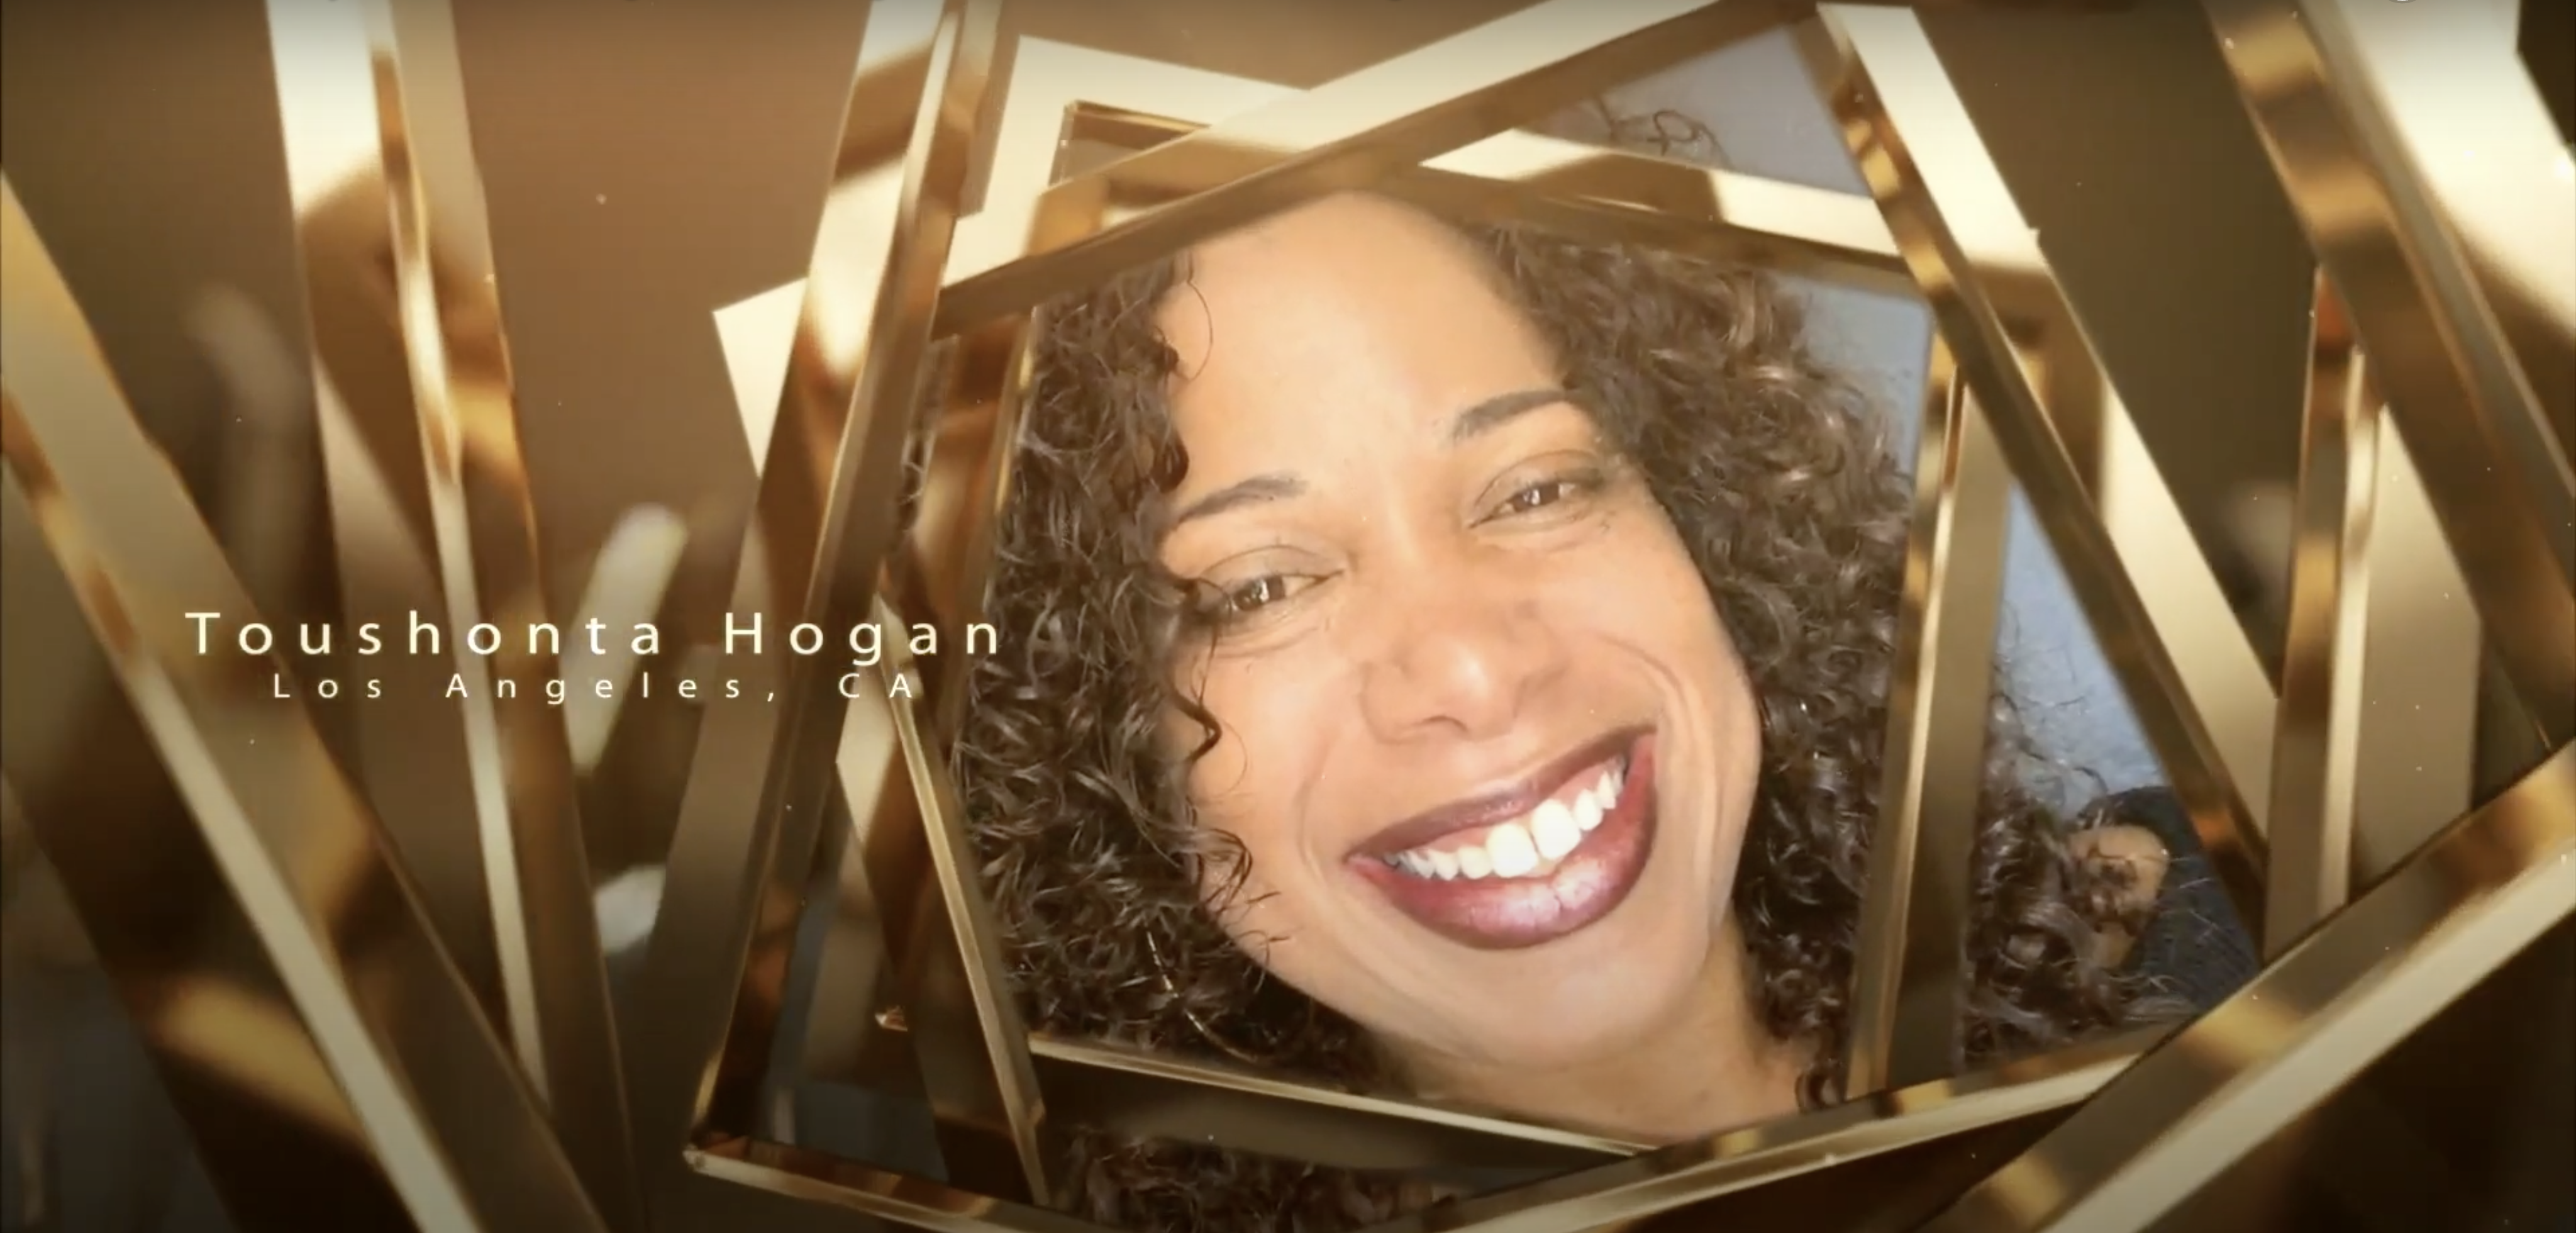 Toushonta Hogan honored for Black History In the Making 2022 by Market Standard Media